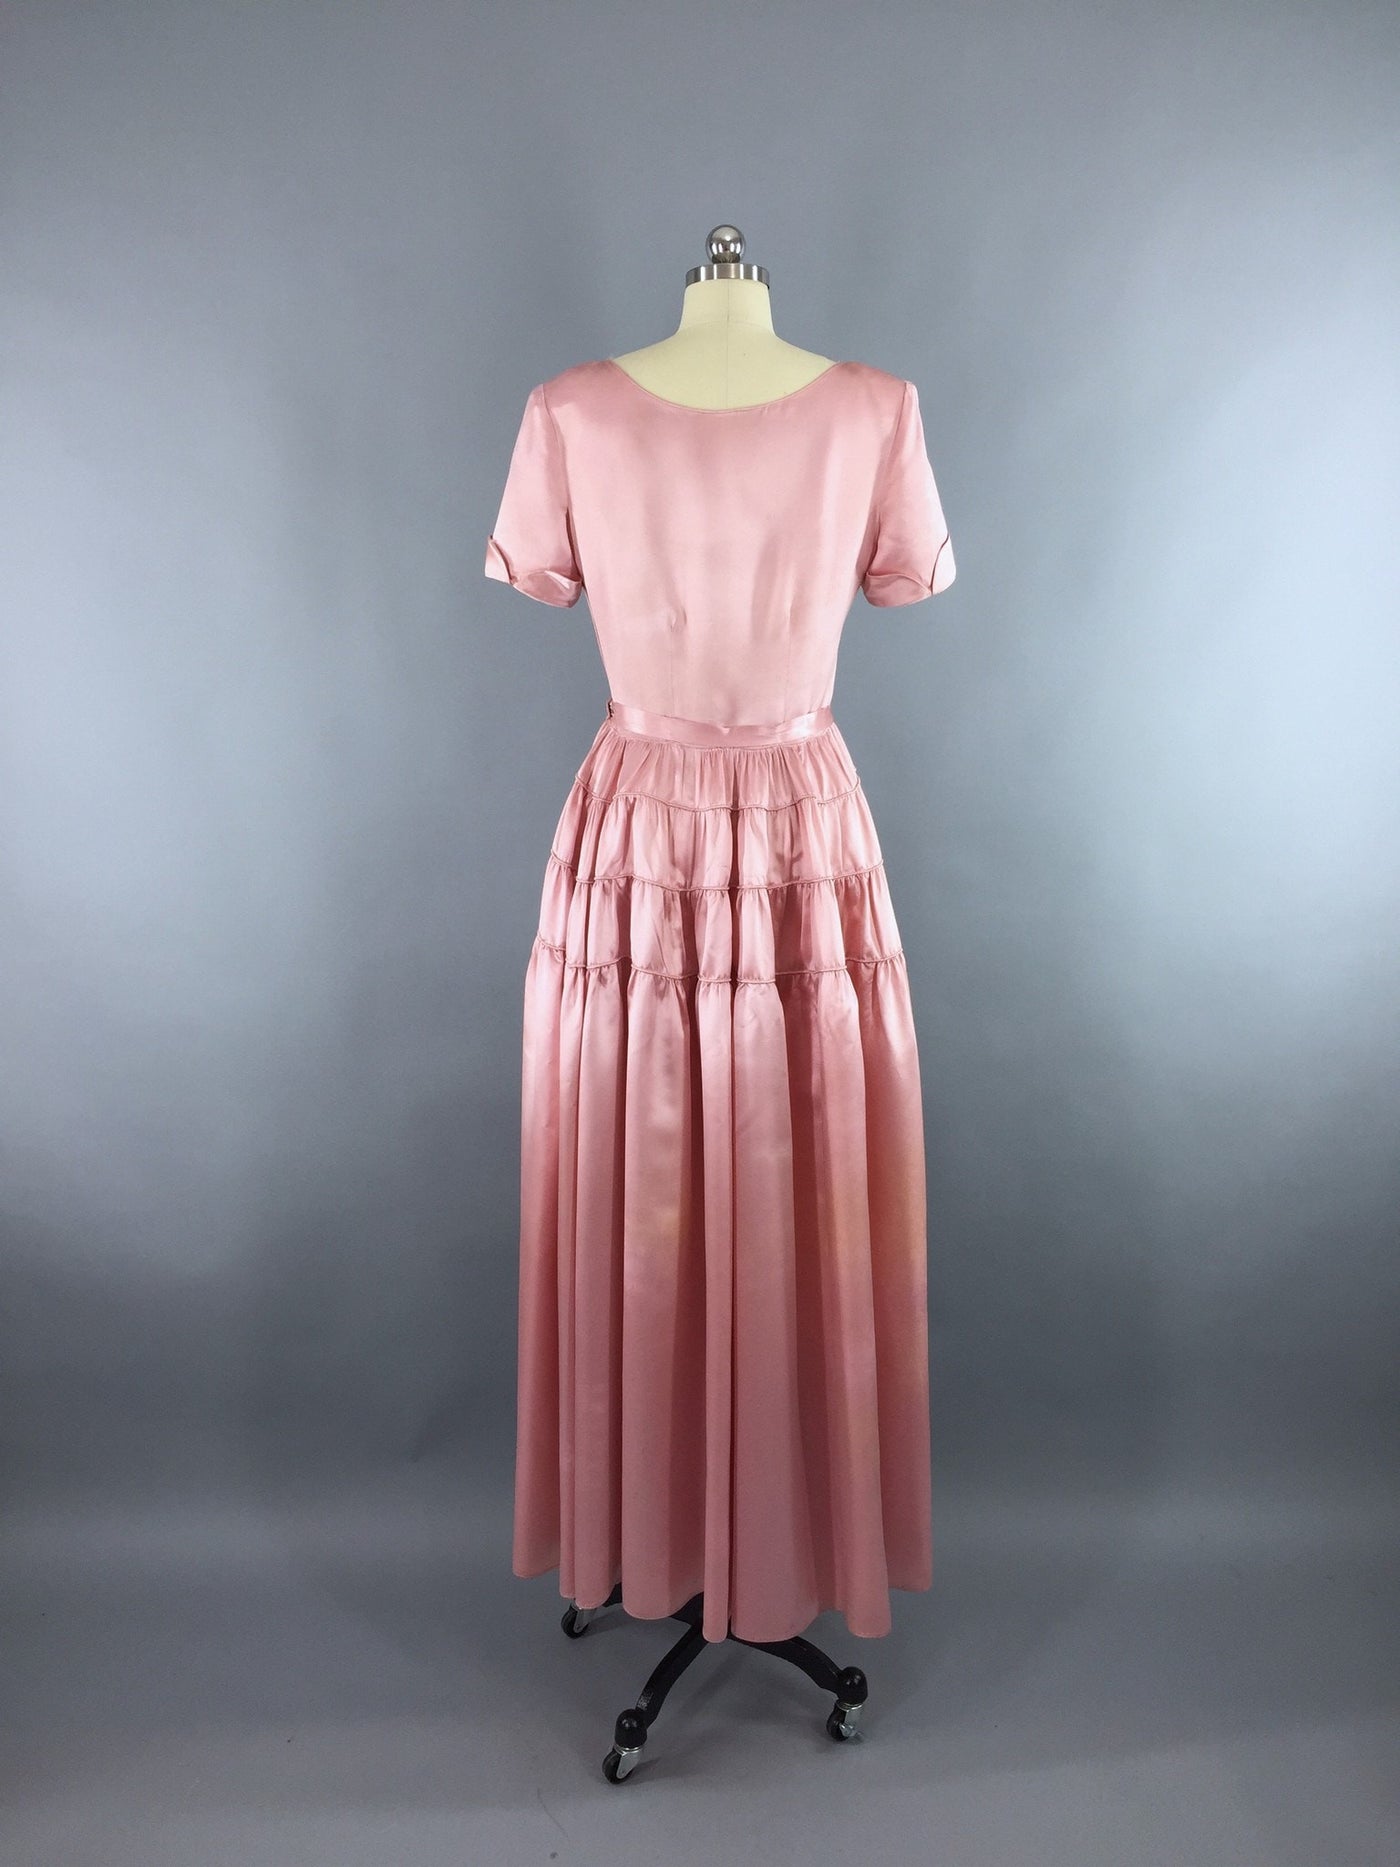 Vintage 1930s-1940s Satin Gown / Pink Maxi Dress - ThisBlueBird